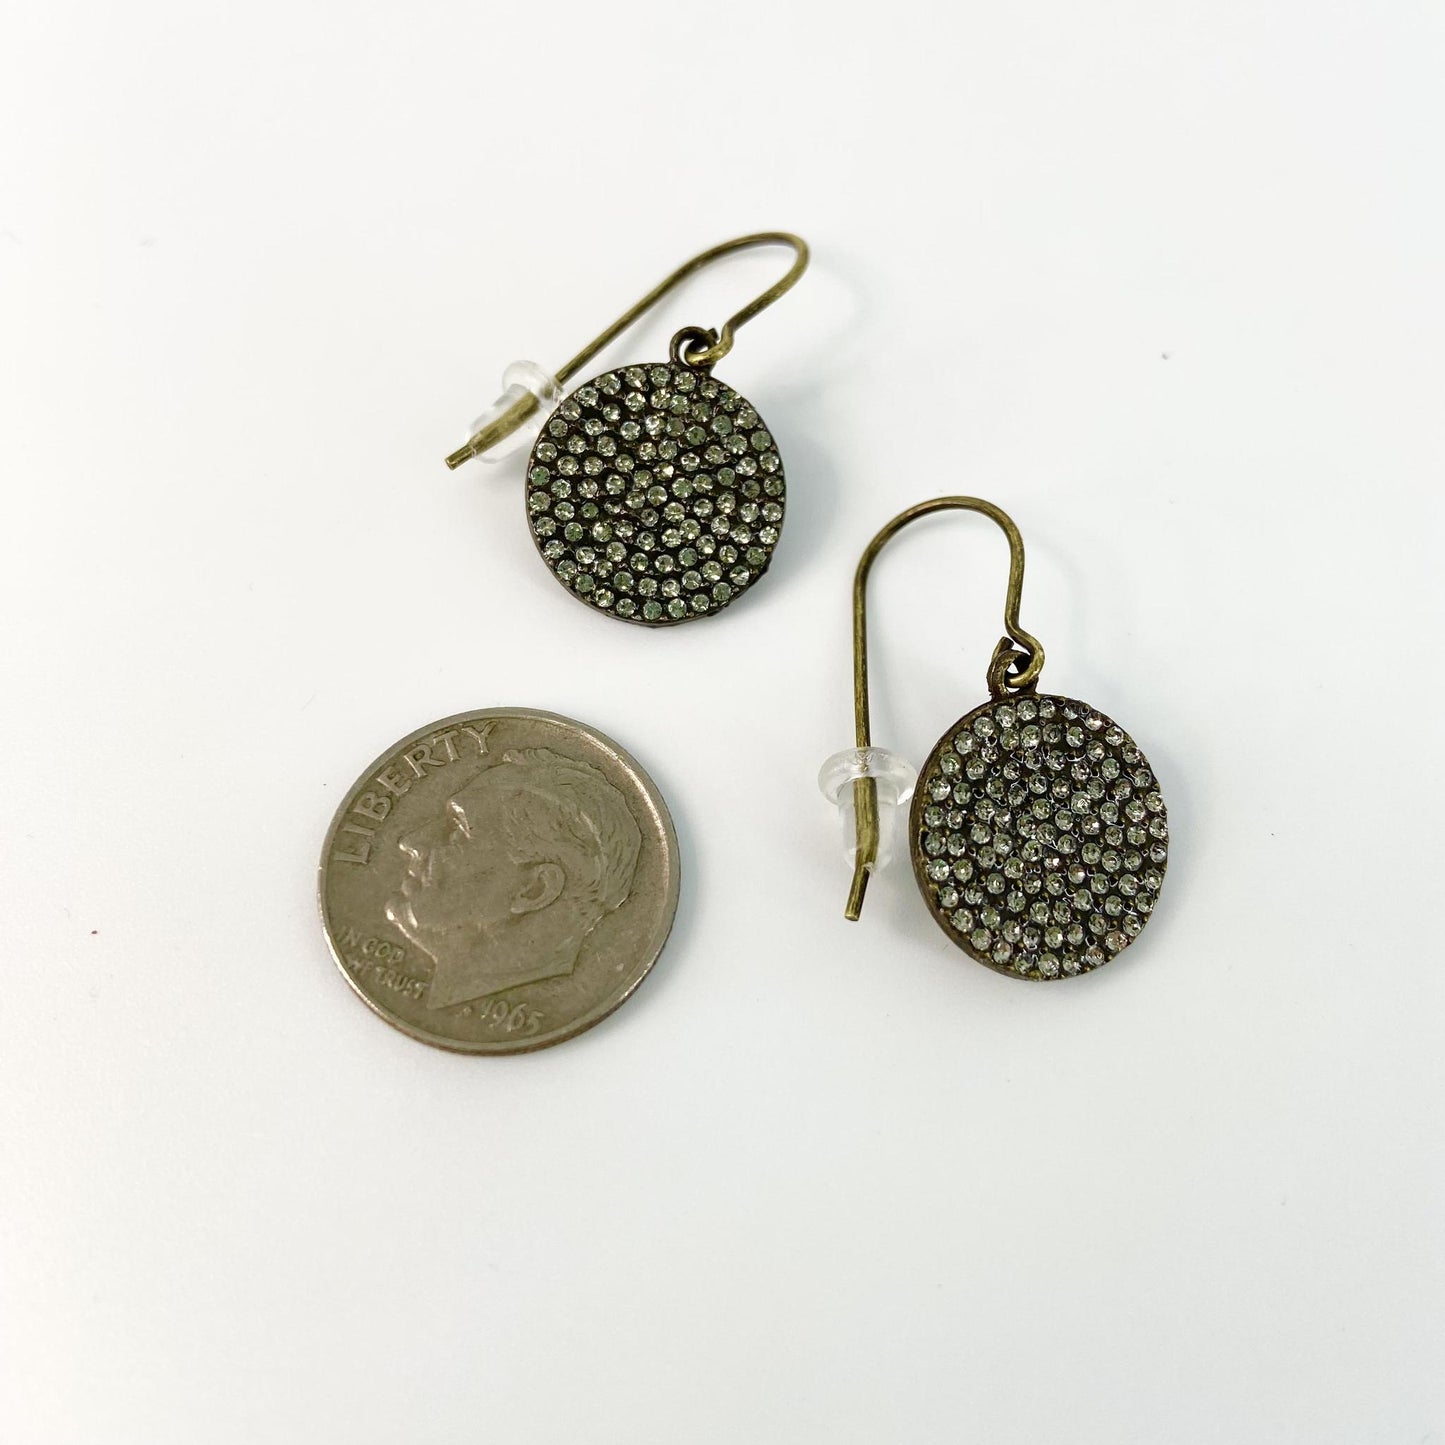 Earrings - Discs Encrusted with Crystals - Antiqued Brass (Video)